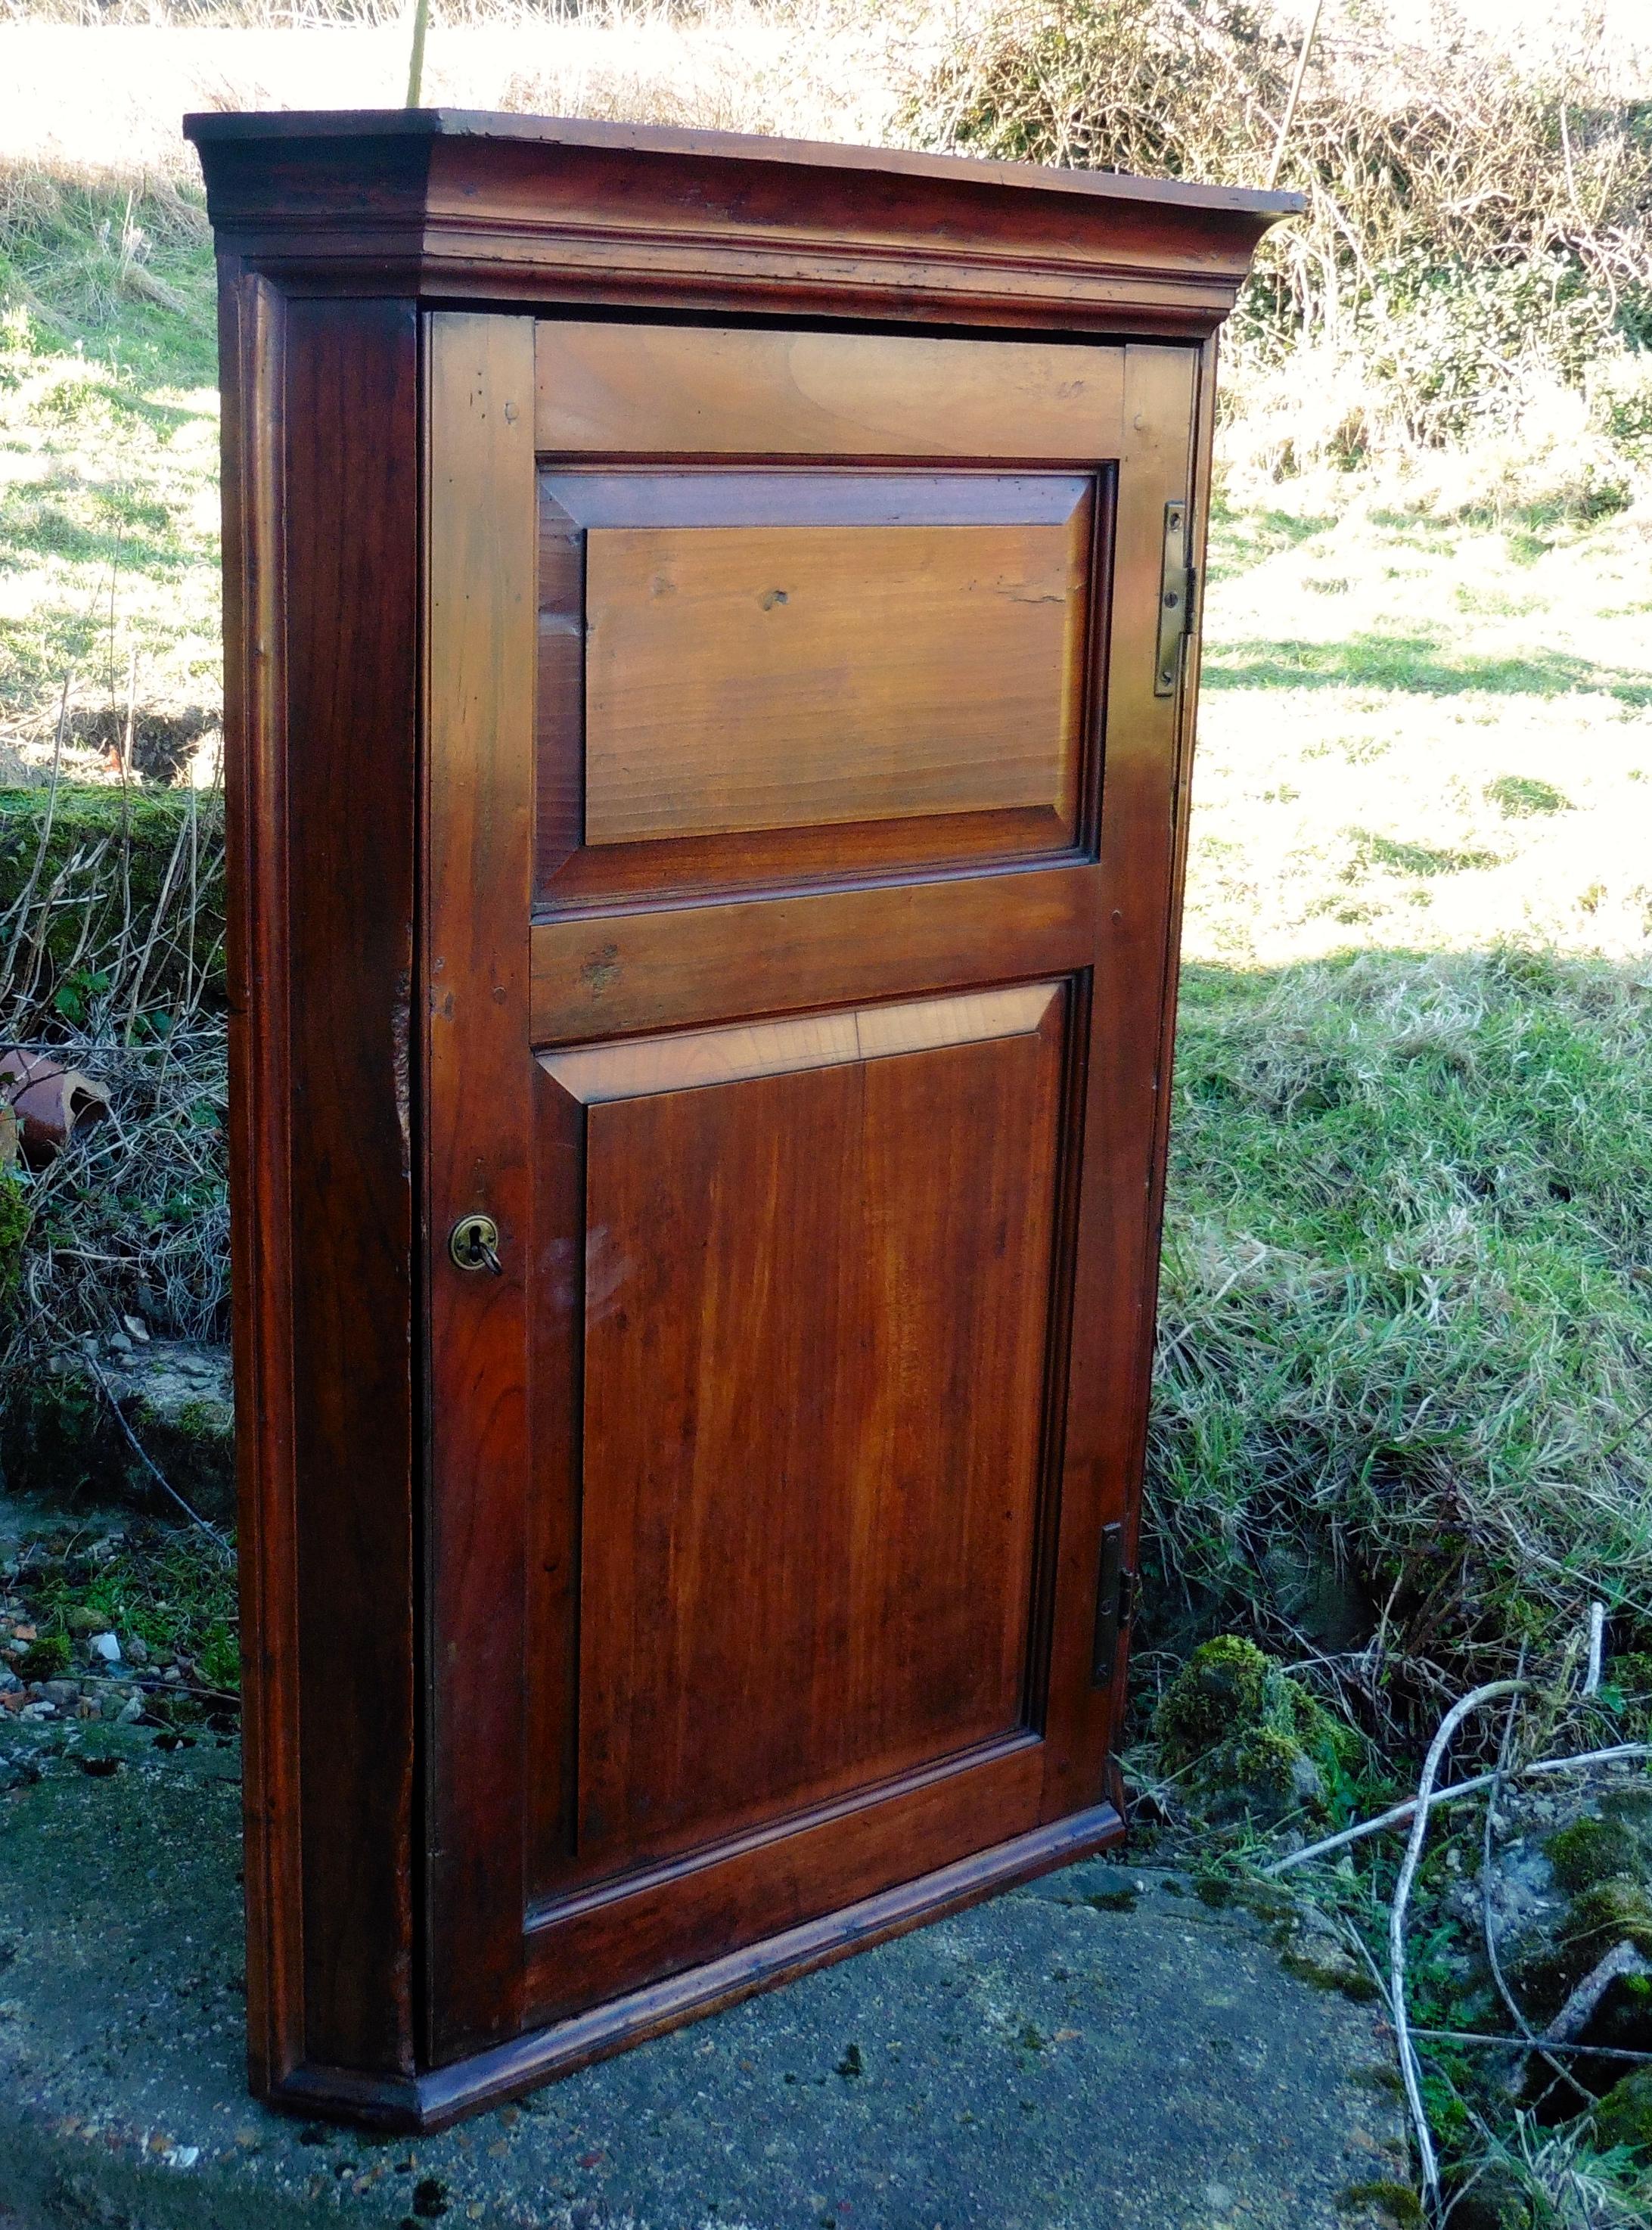 Rare18th Century English Cherry Wood Corner Cupboard

This is a rare piece, a 18th Century Corner Cupboard made in English cherry wood, much darker than the better known continental cherry wood
The cupboard has a 2 panelled doors with blacksmith